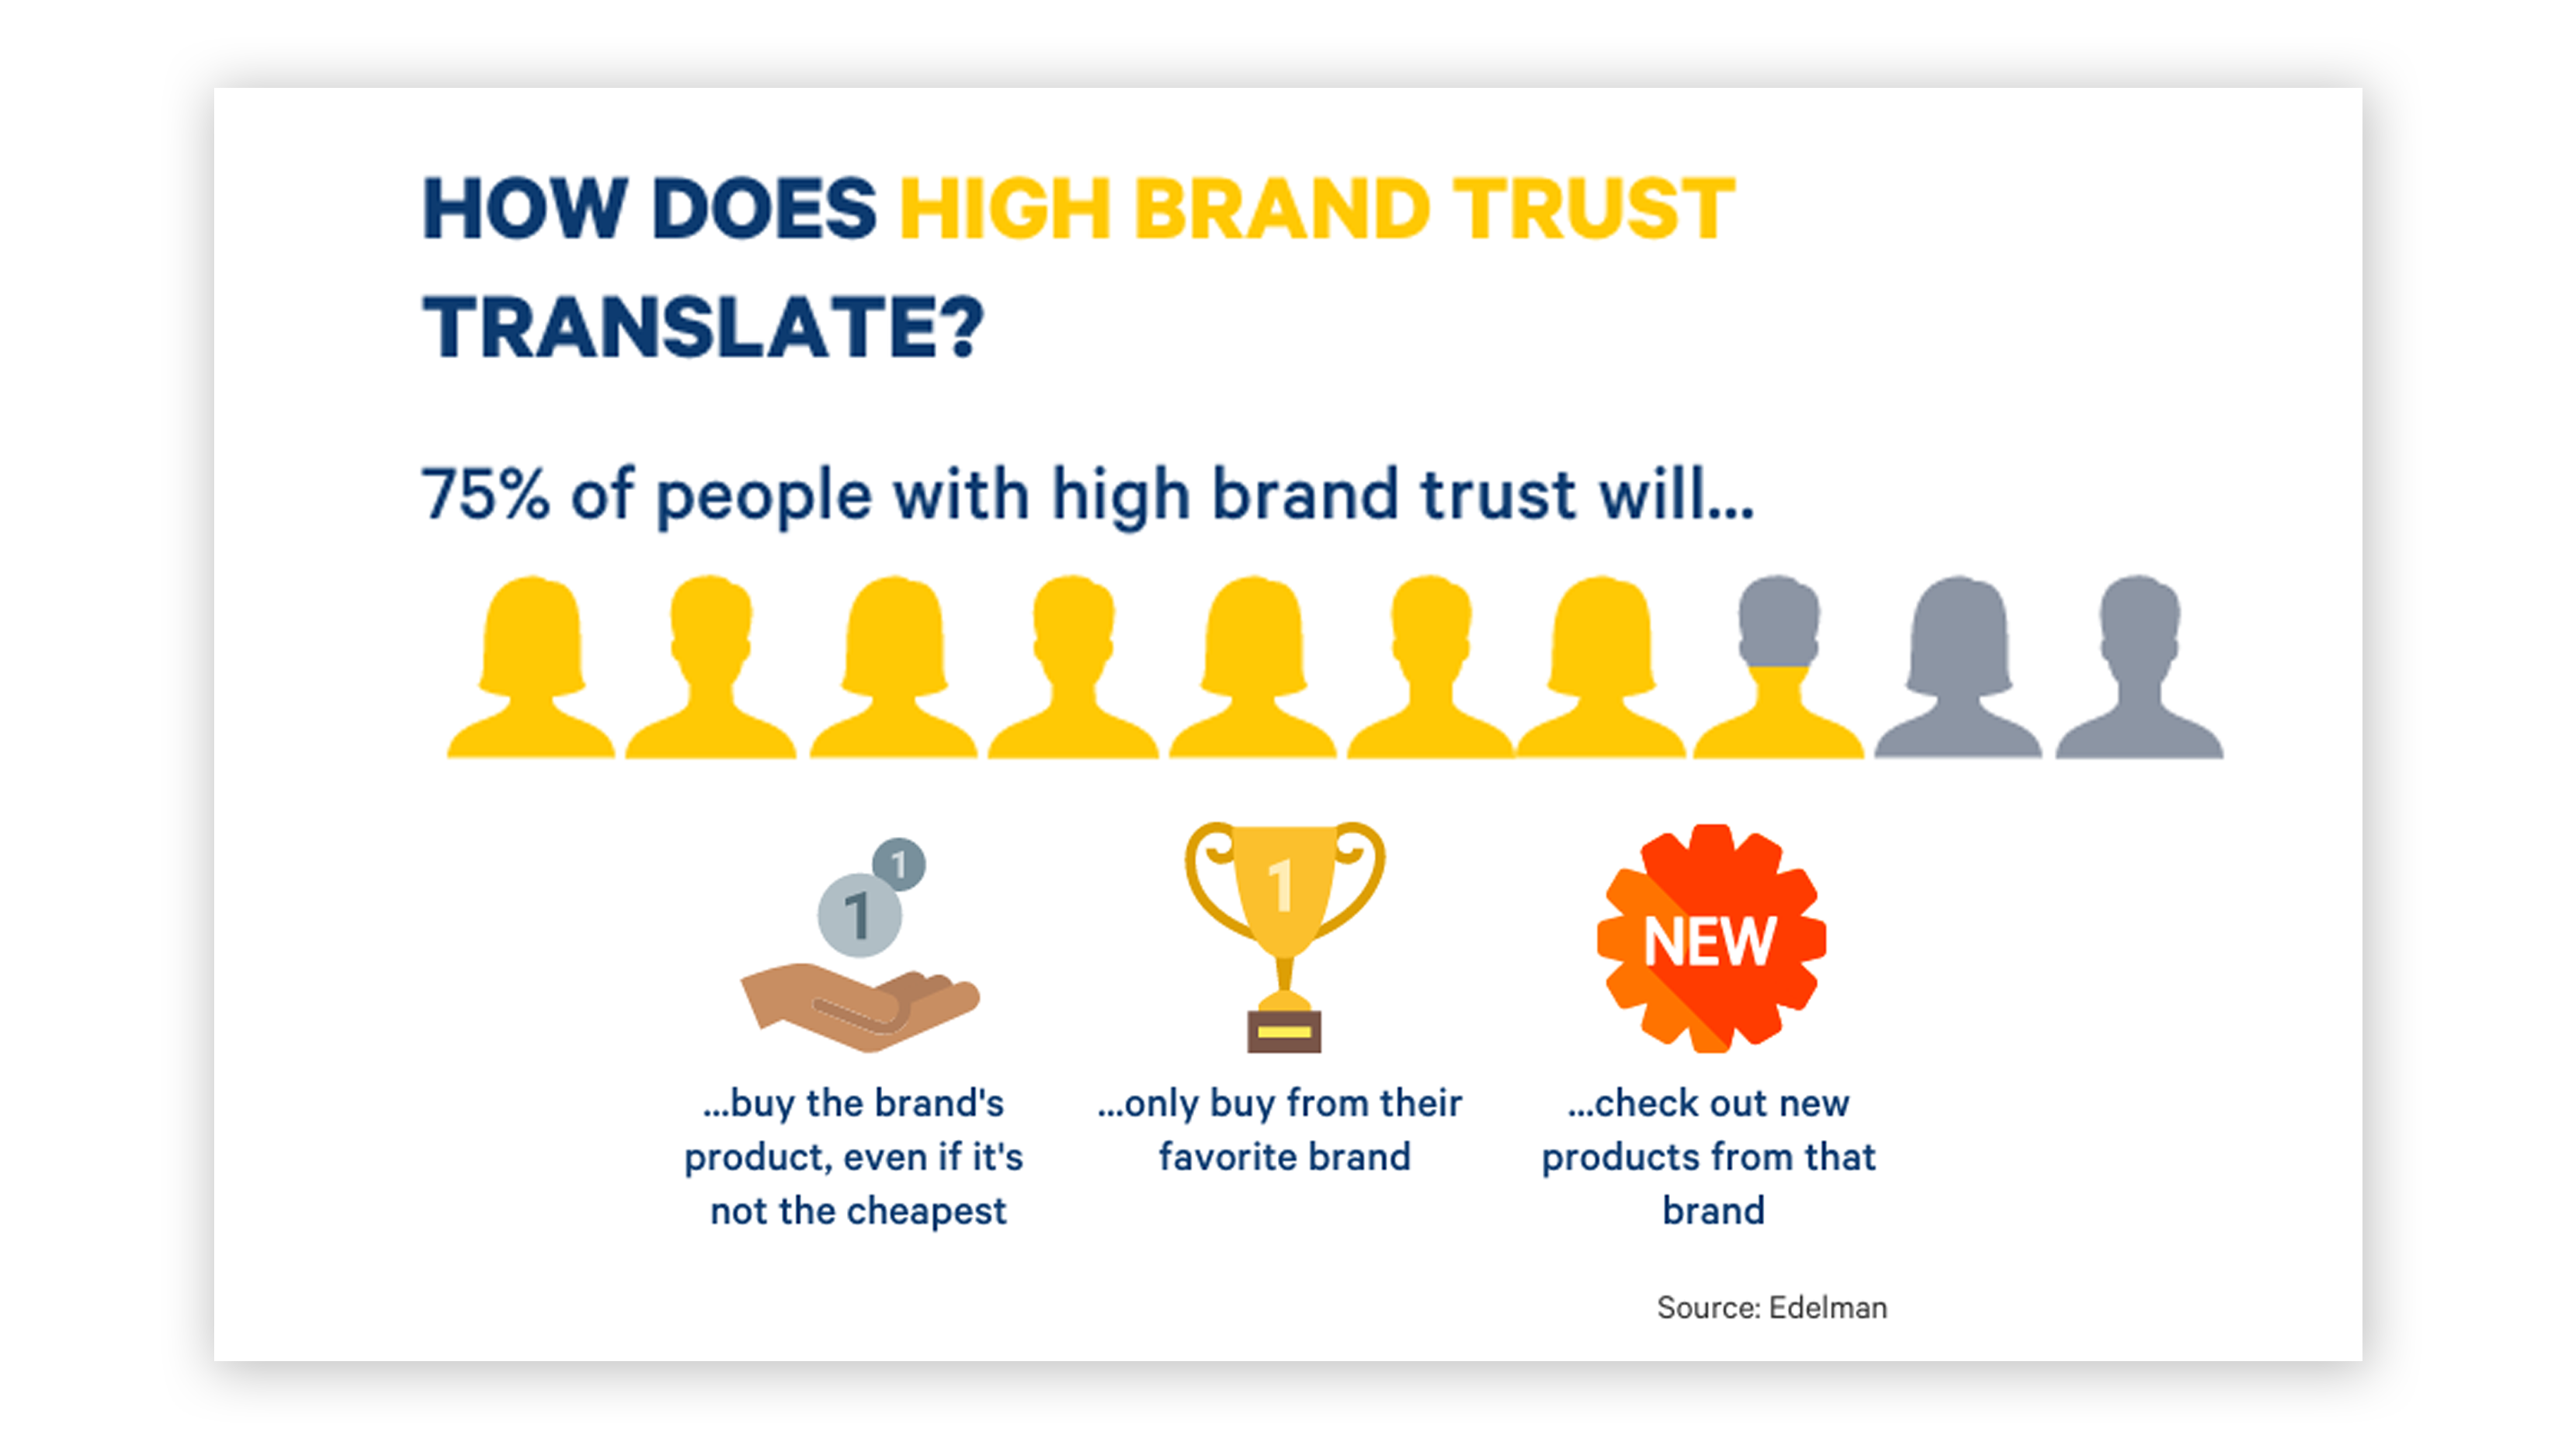 high brand trust help more people to purchase